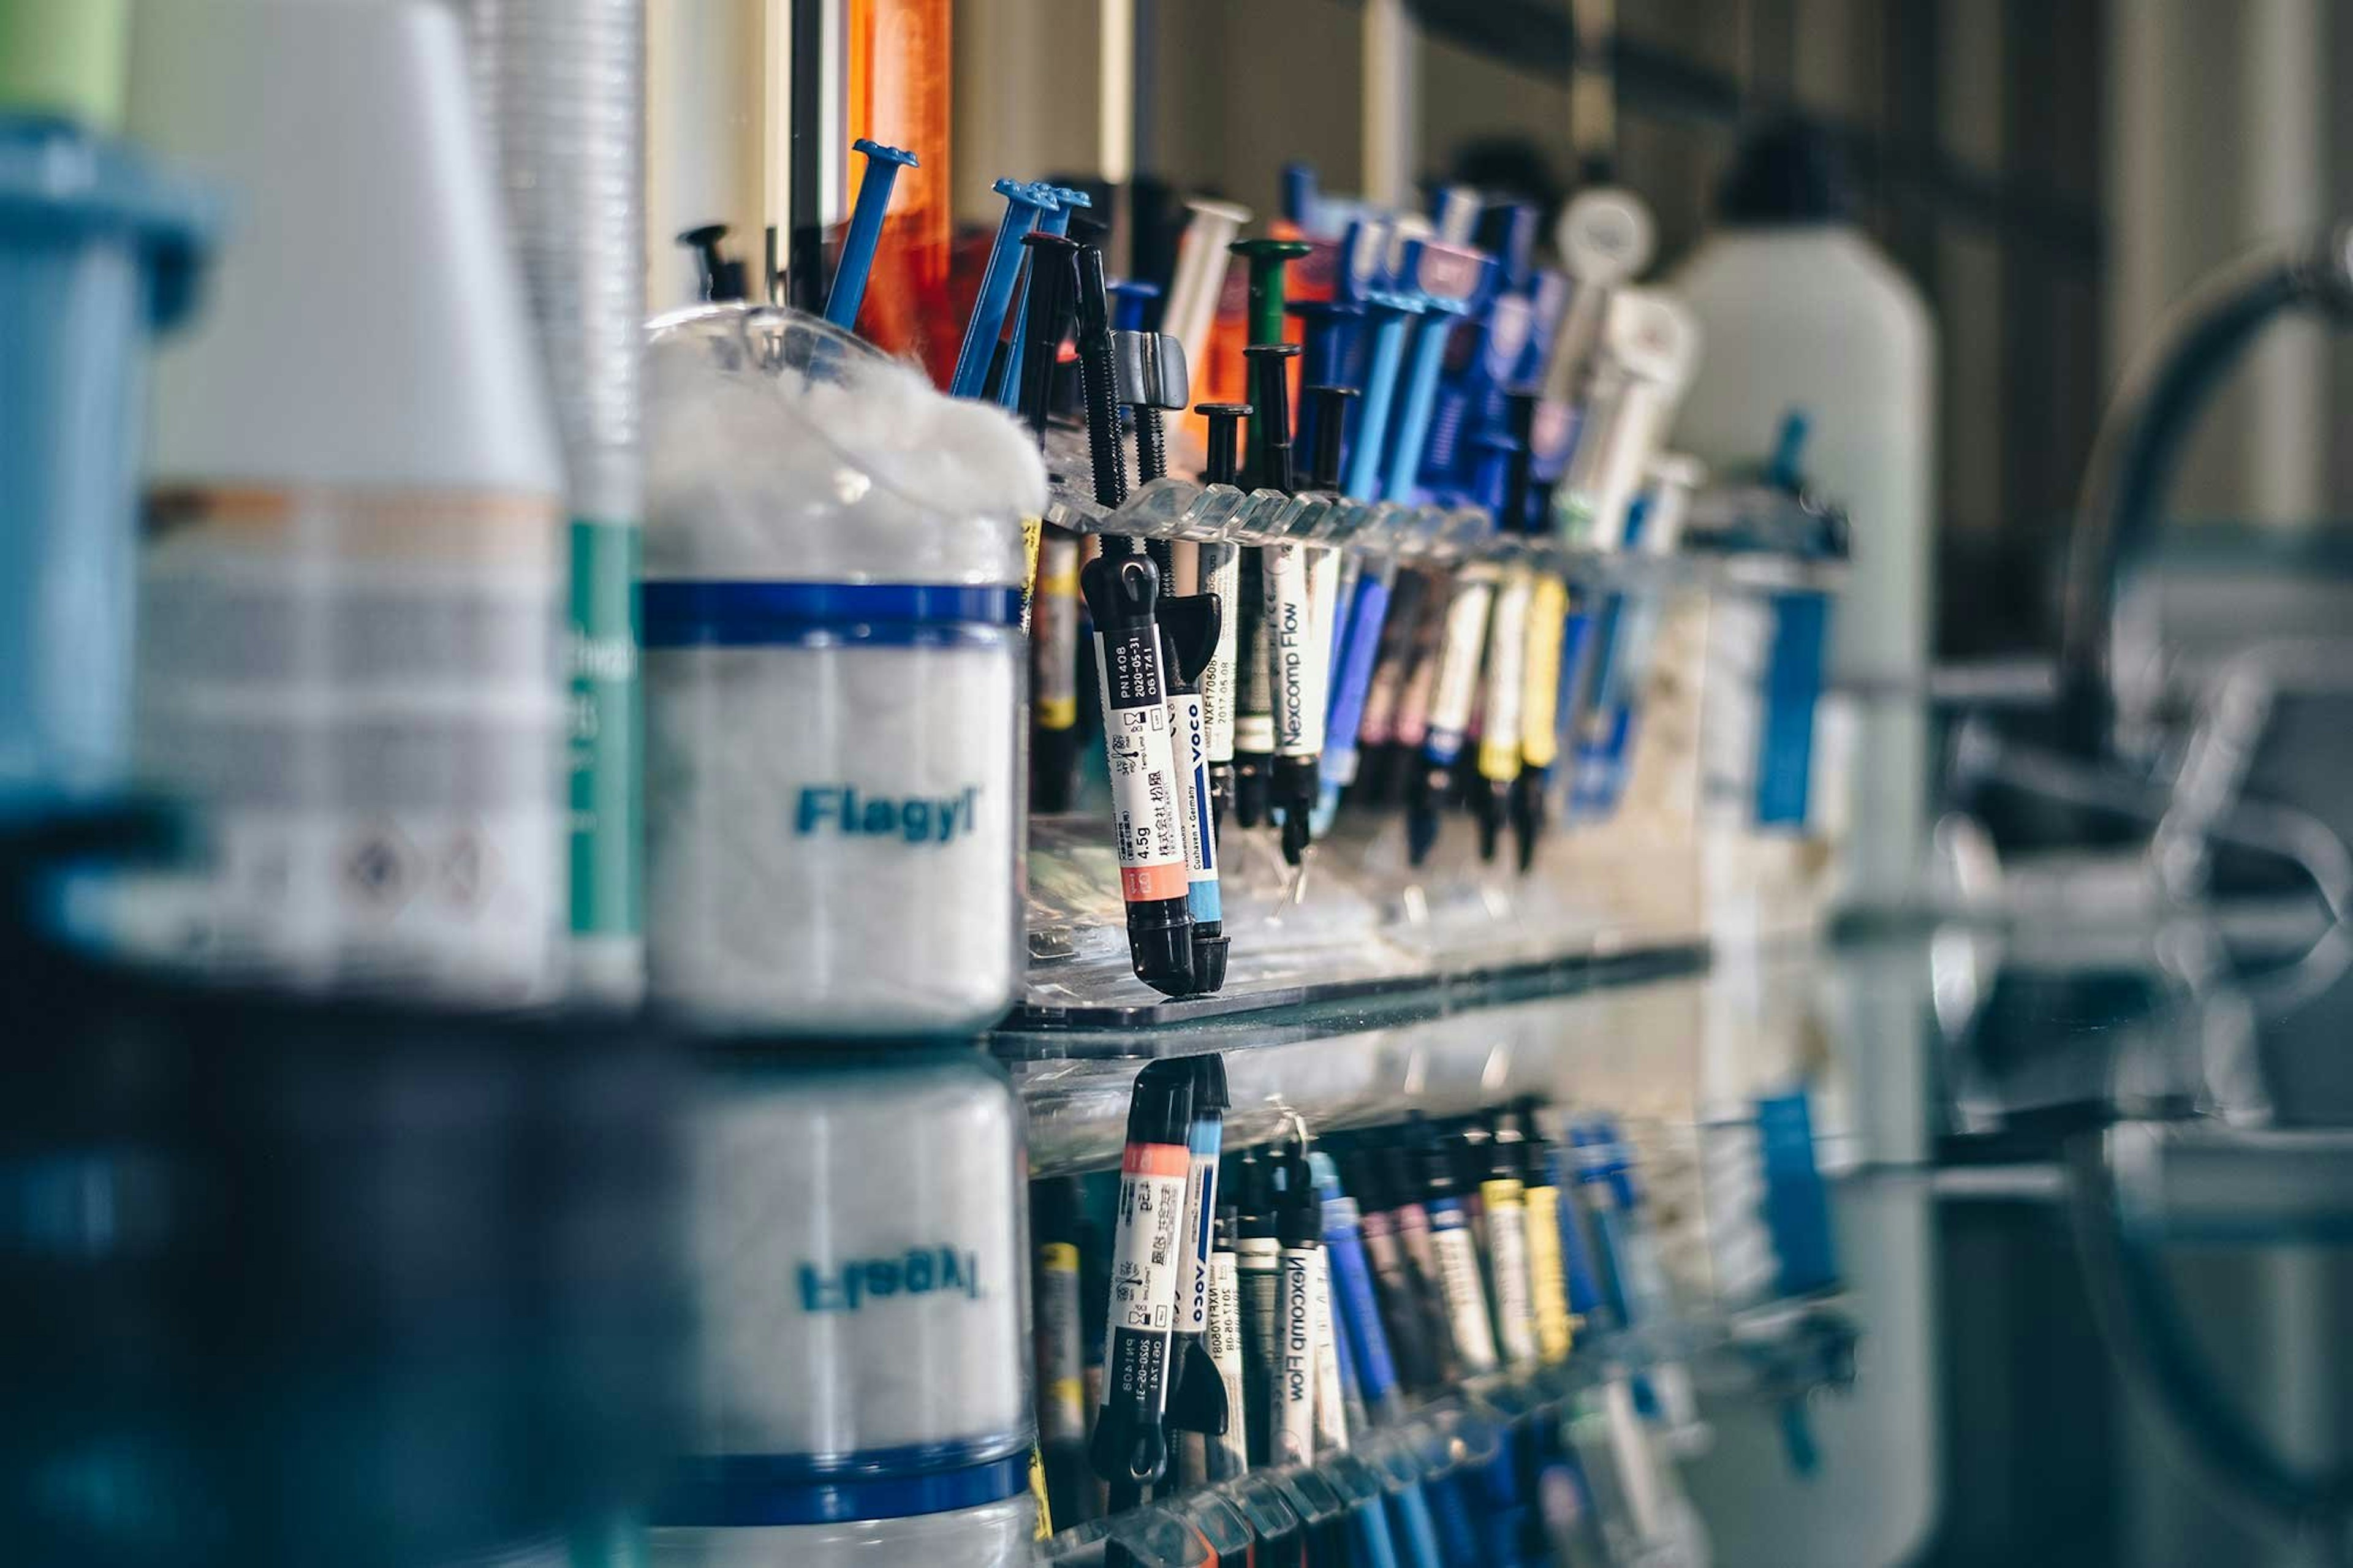 Vials and pipettes on counter